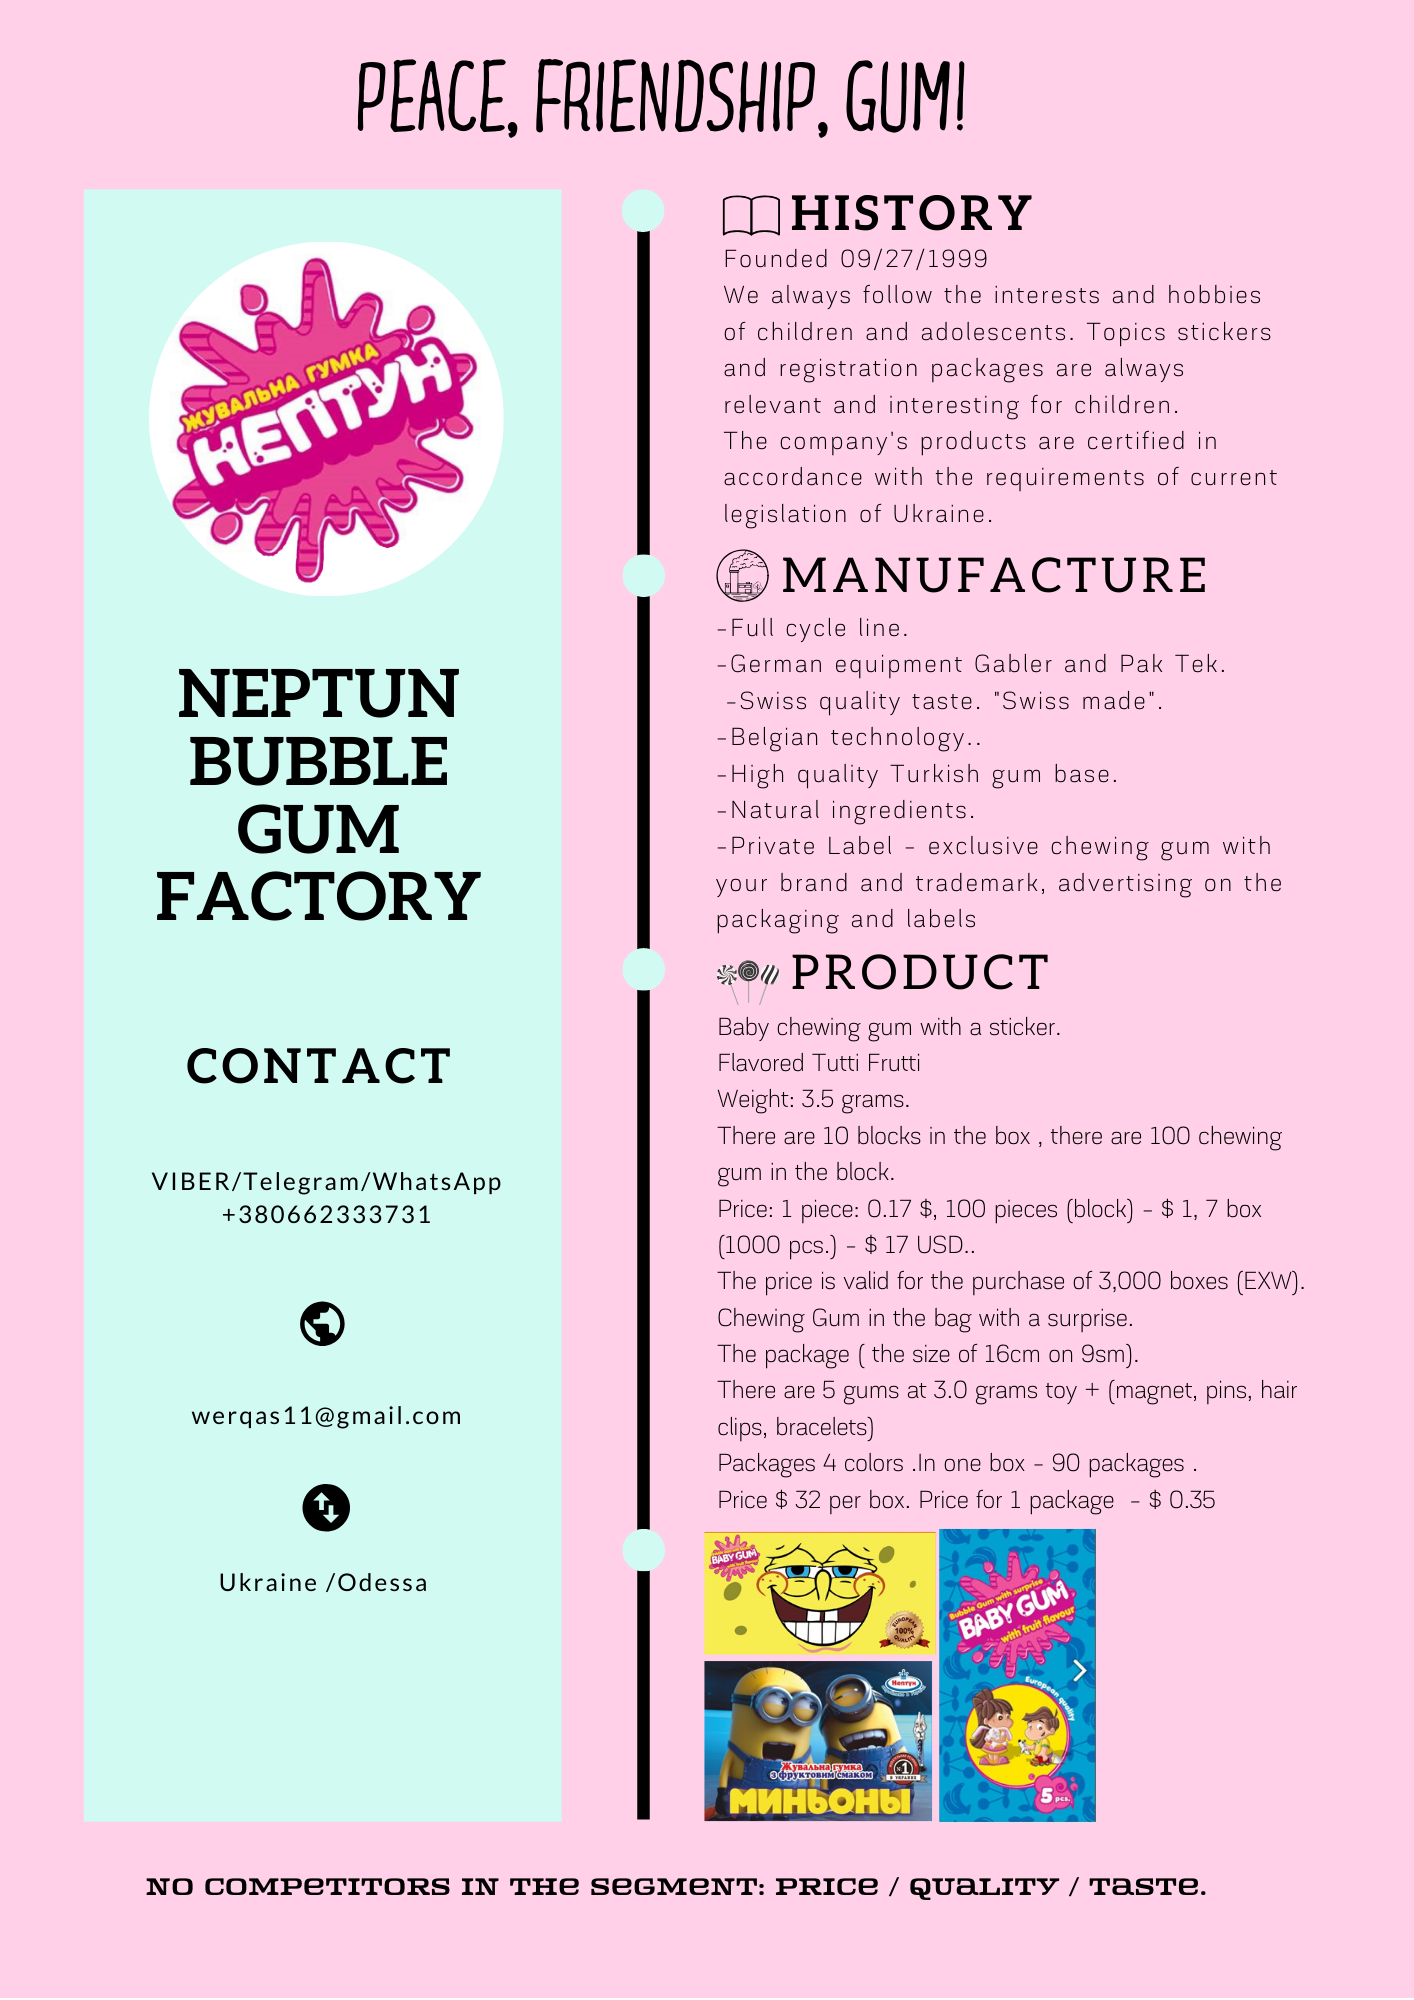 Product image - Bubble Gum factory NEPTUN. PRODUCER OF CHEWING GUM

The "Neptune Company" is the only domestic manufacturer of chewing gum for children with stickers and tattoos for over 17 years in Ukraine. 